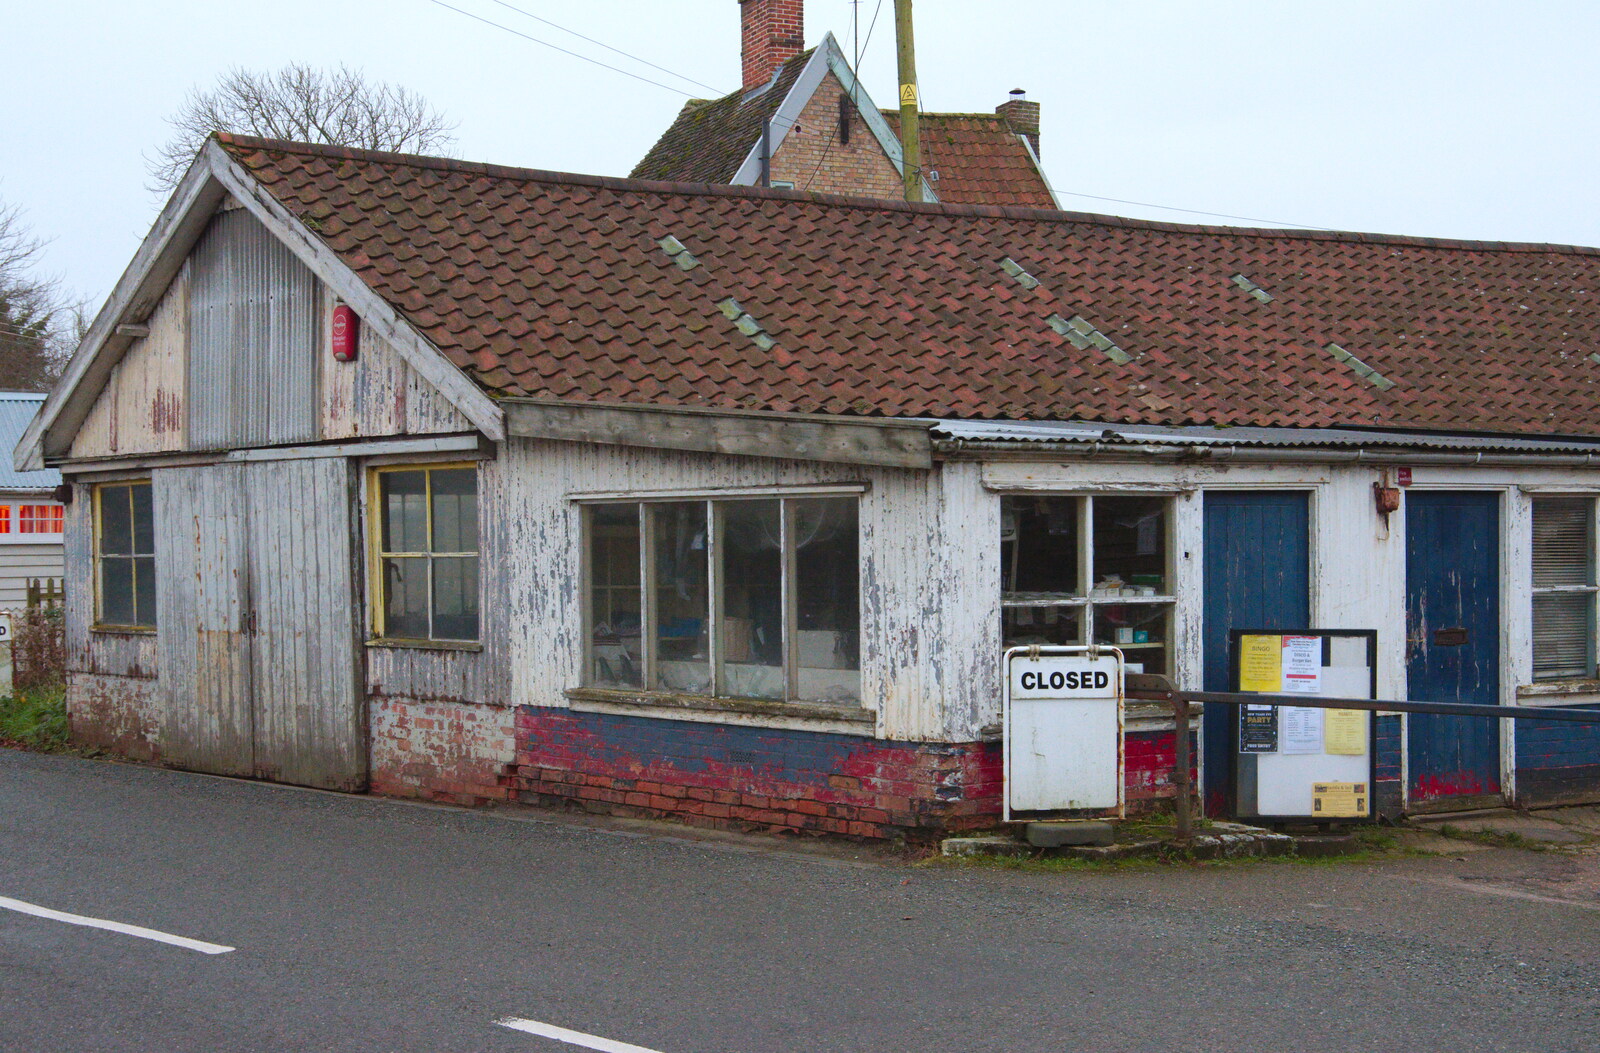 The old Laxfield petrol station from A Trip to the Beach, Dunwich Heath, Suffolk - 27th December 2019